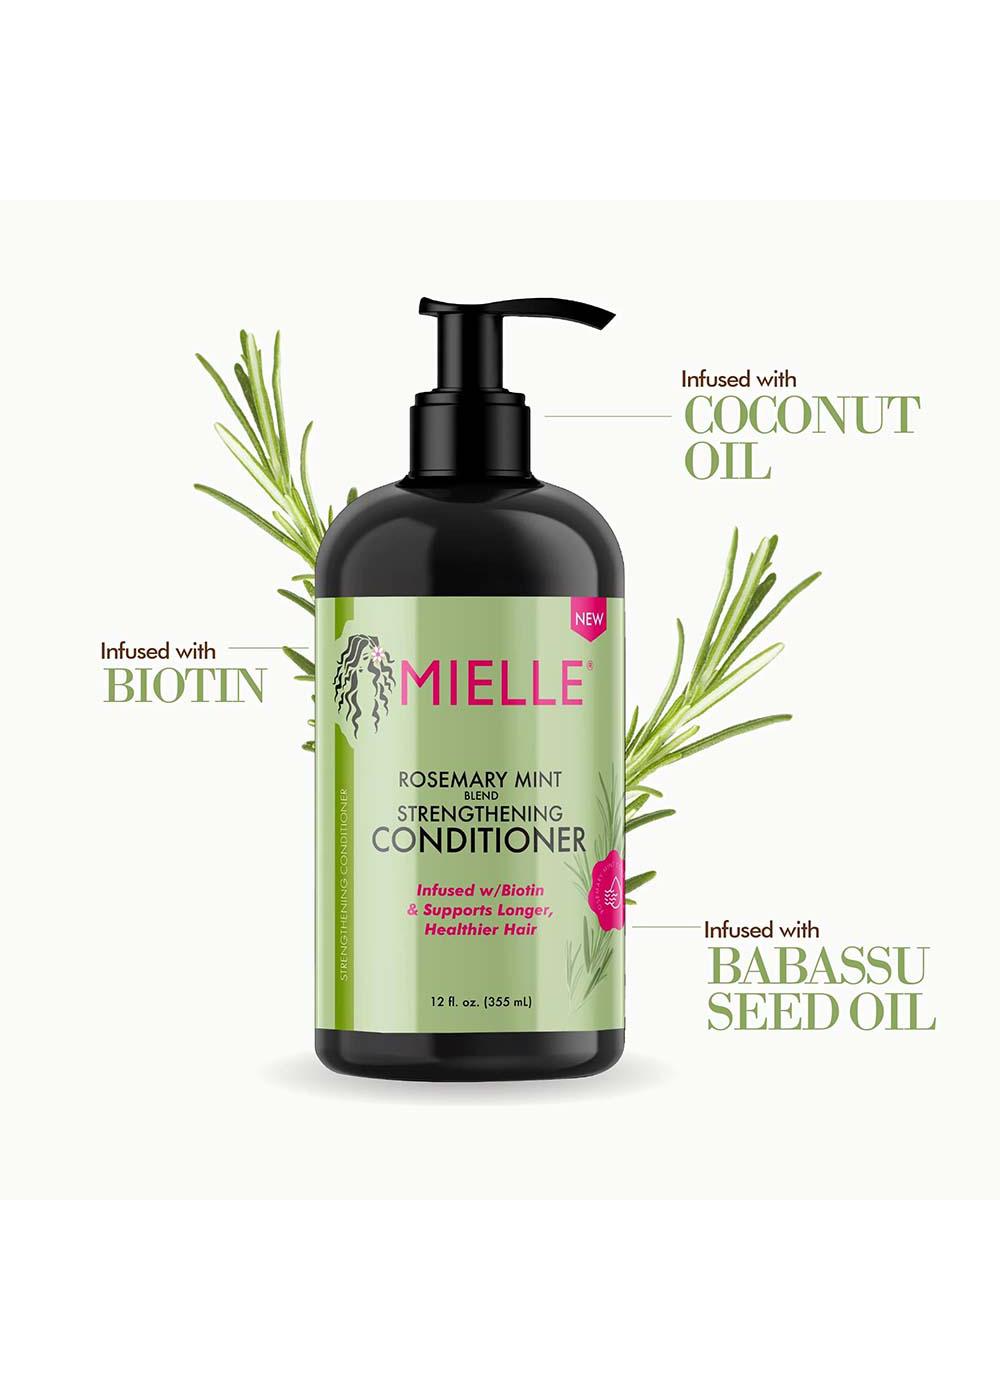 Mielle Rosemary Mint Blend Strengthening Conditioner; image 2 of 3